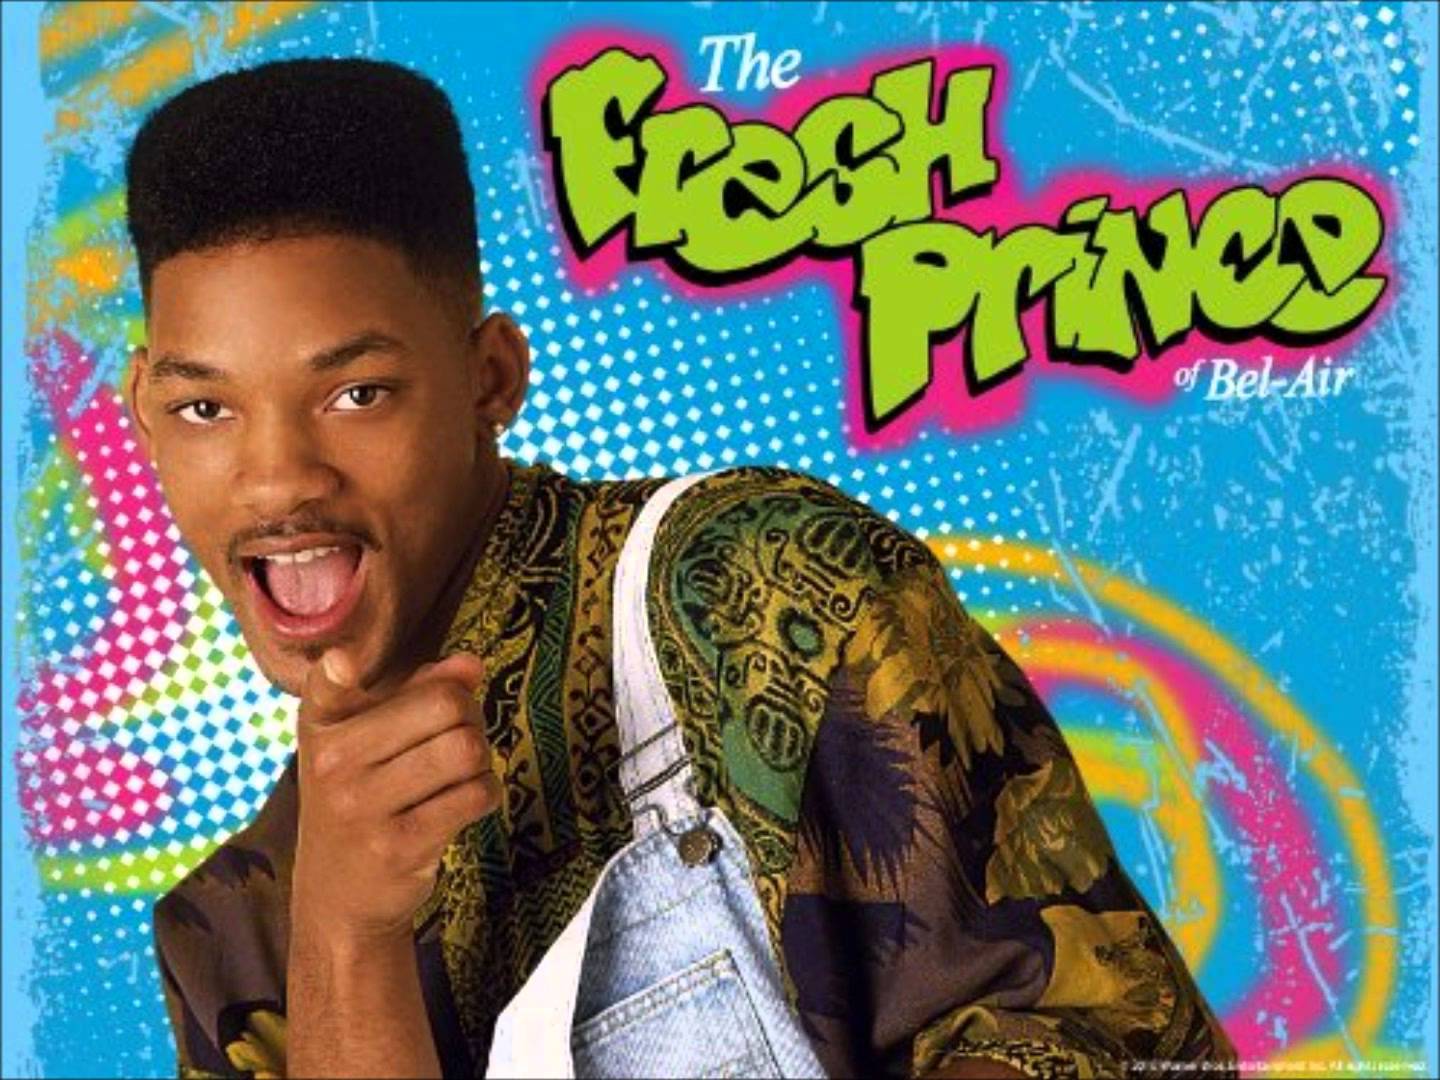 What Does Your Taste in Classic TV Shows Say About You? The Fresh Prince of Bel Air